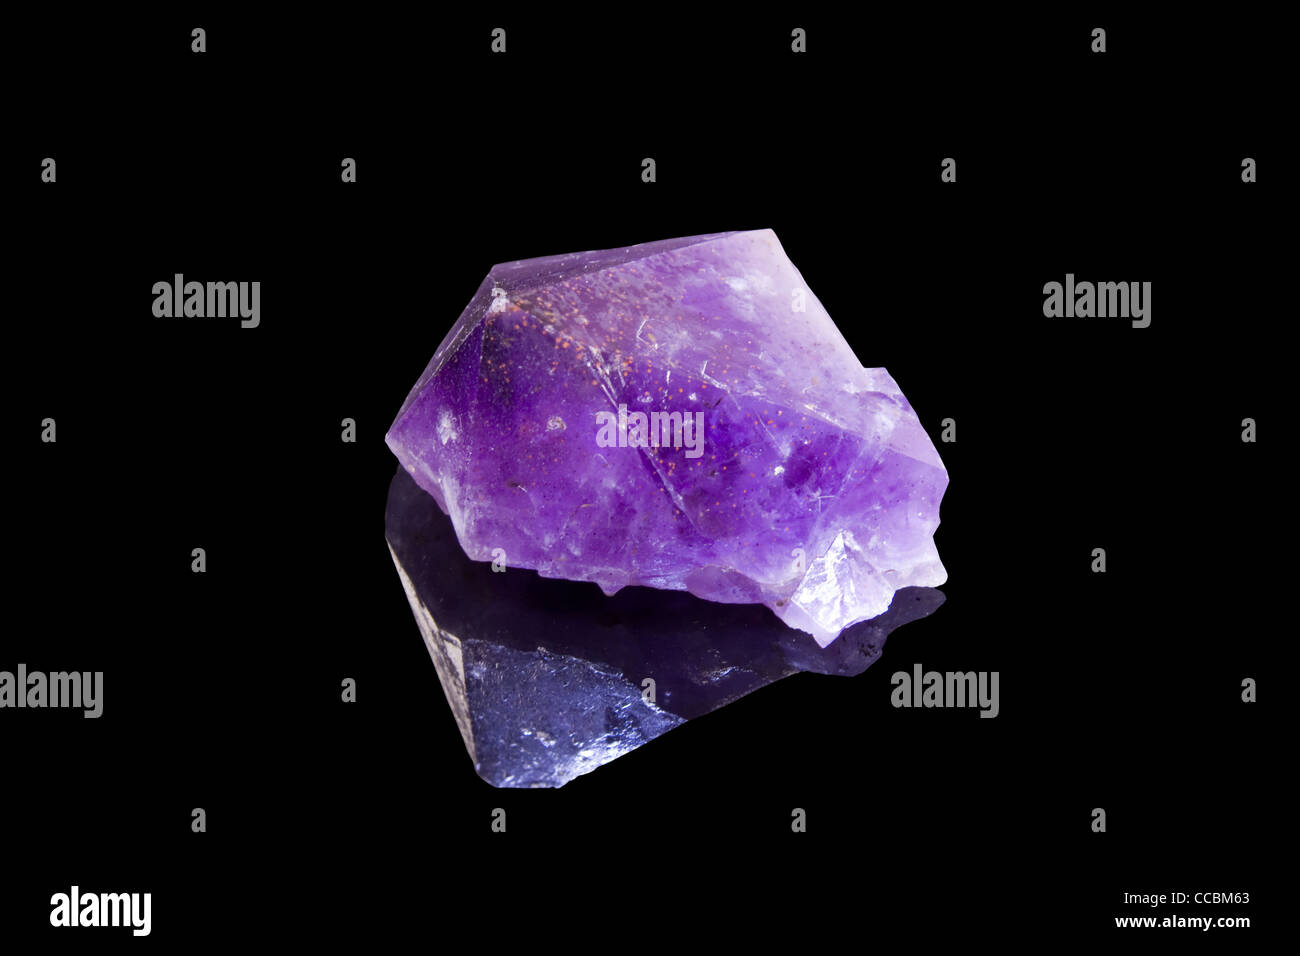 amethyst crystal with reflection over a black background Stock Photo